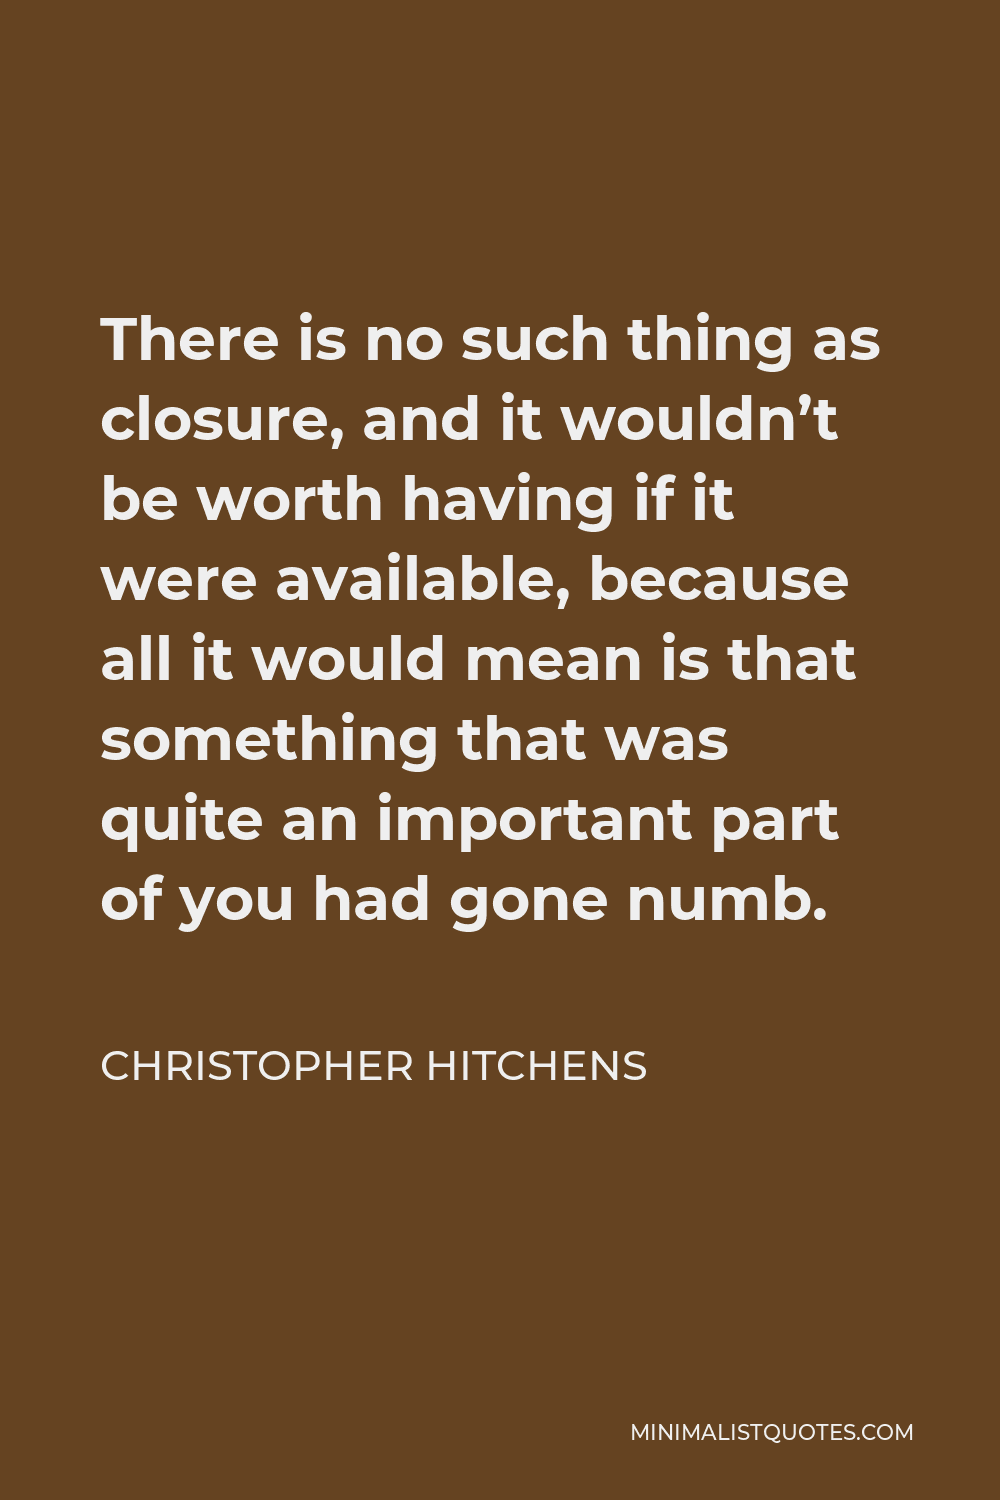 Christopher Hitchens Quote - There is no such thing as closure, and it wouldn’t be worth having if it were available, because all it would mean is that something that was quite an important part of you had gone numb.